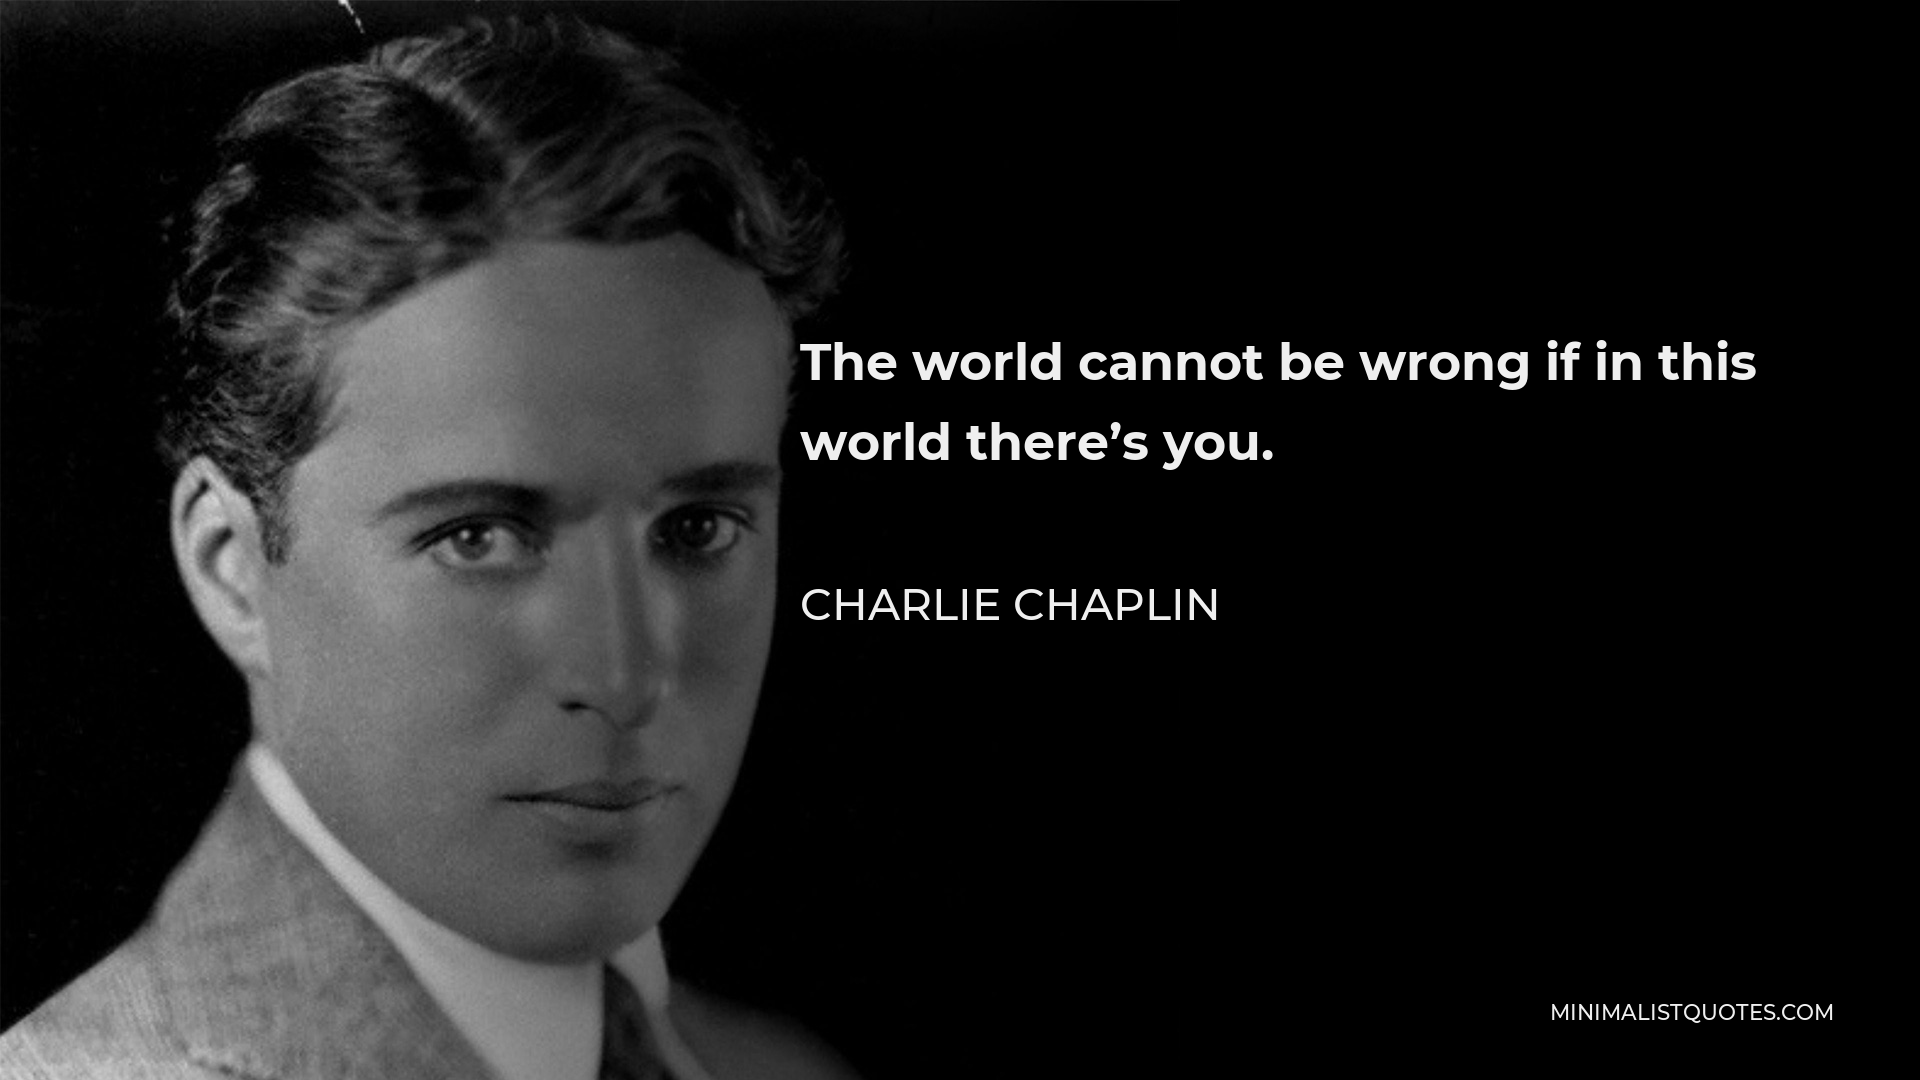 Charlie Chaplin Quote - The world cannot be wrong if in this world there’s you.